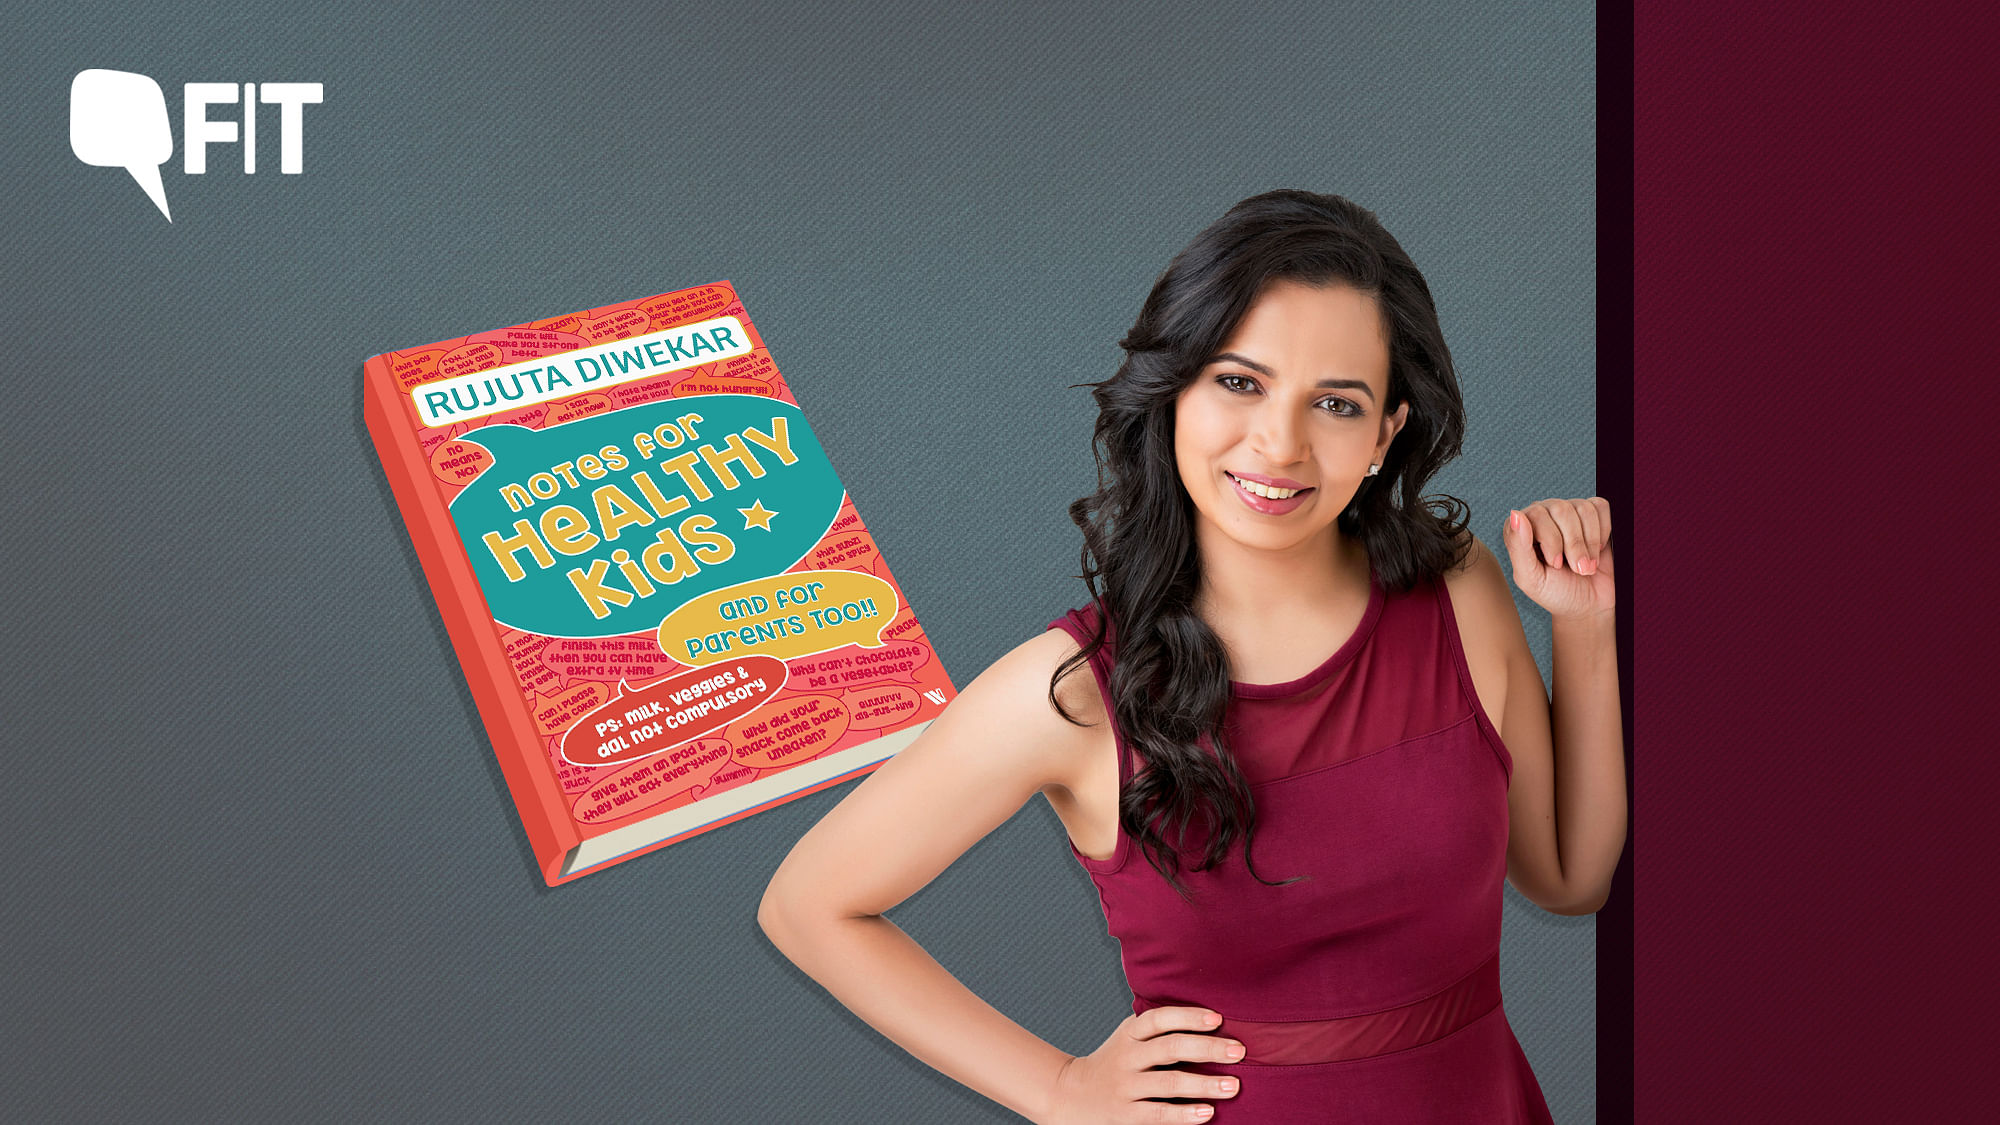  Celebrity nutritionist Rujuta Diwekar is making headlines with her new book ‘Notes for Healthy Kids’.